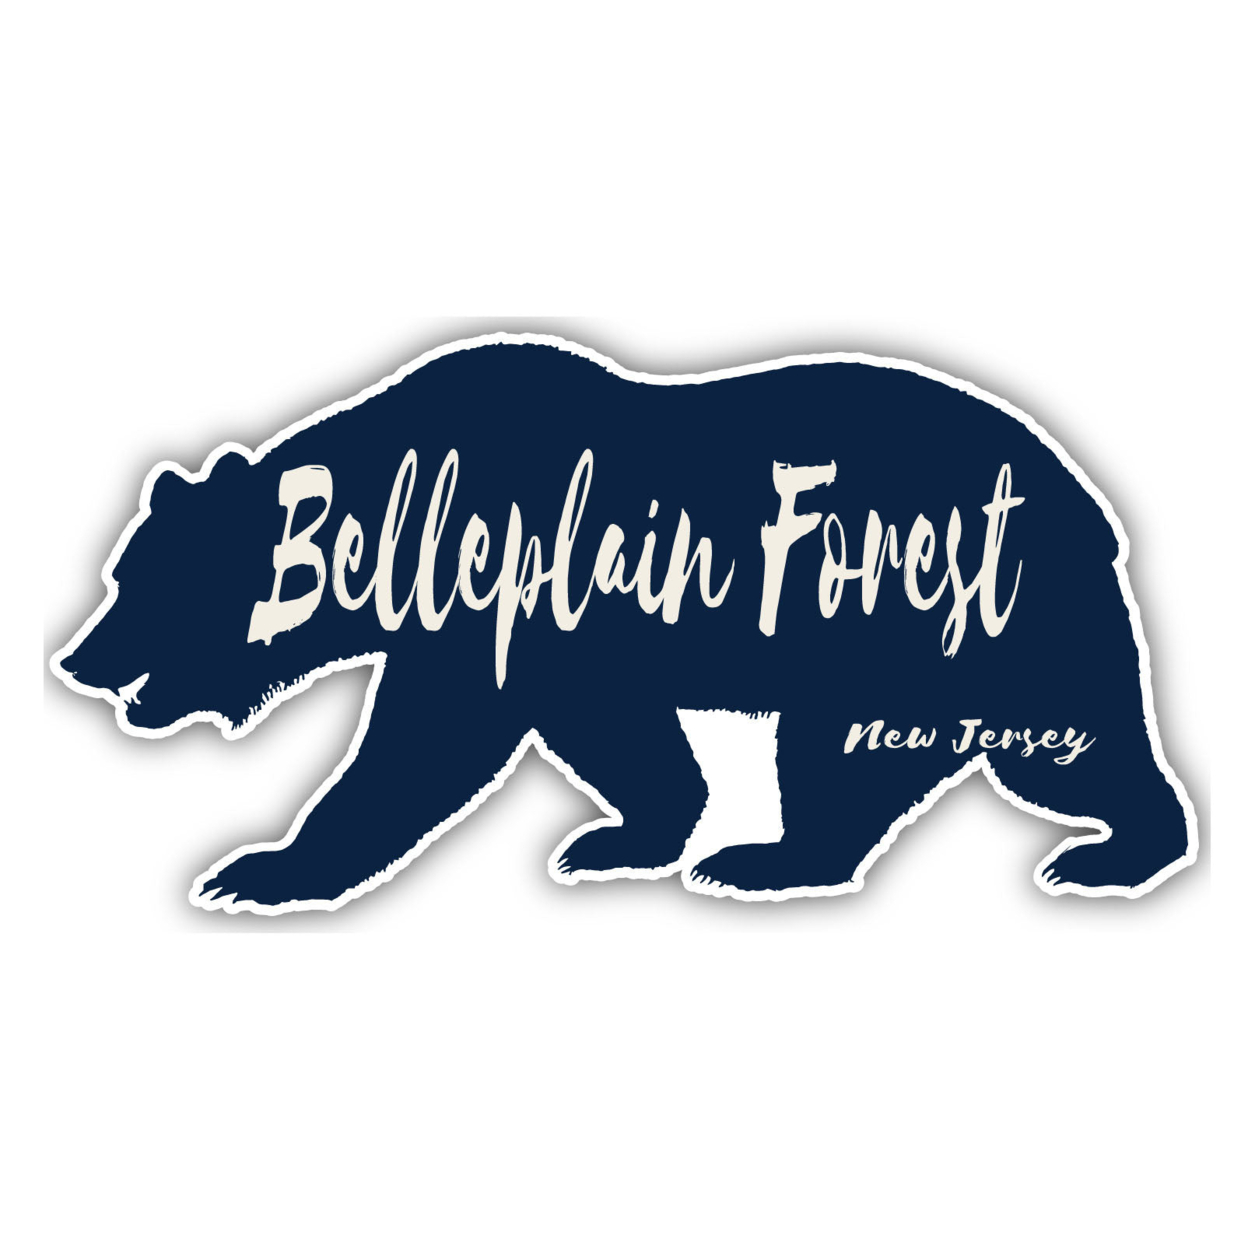 Belleplain Forest New Jersey Souvenir Decorative Stickers (Choose Theme And Size) - 4-Pack, 6-Inch, Bear